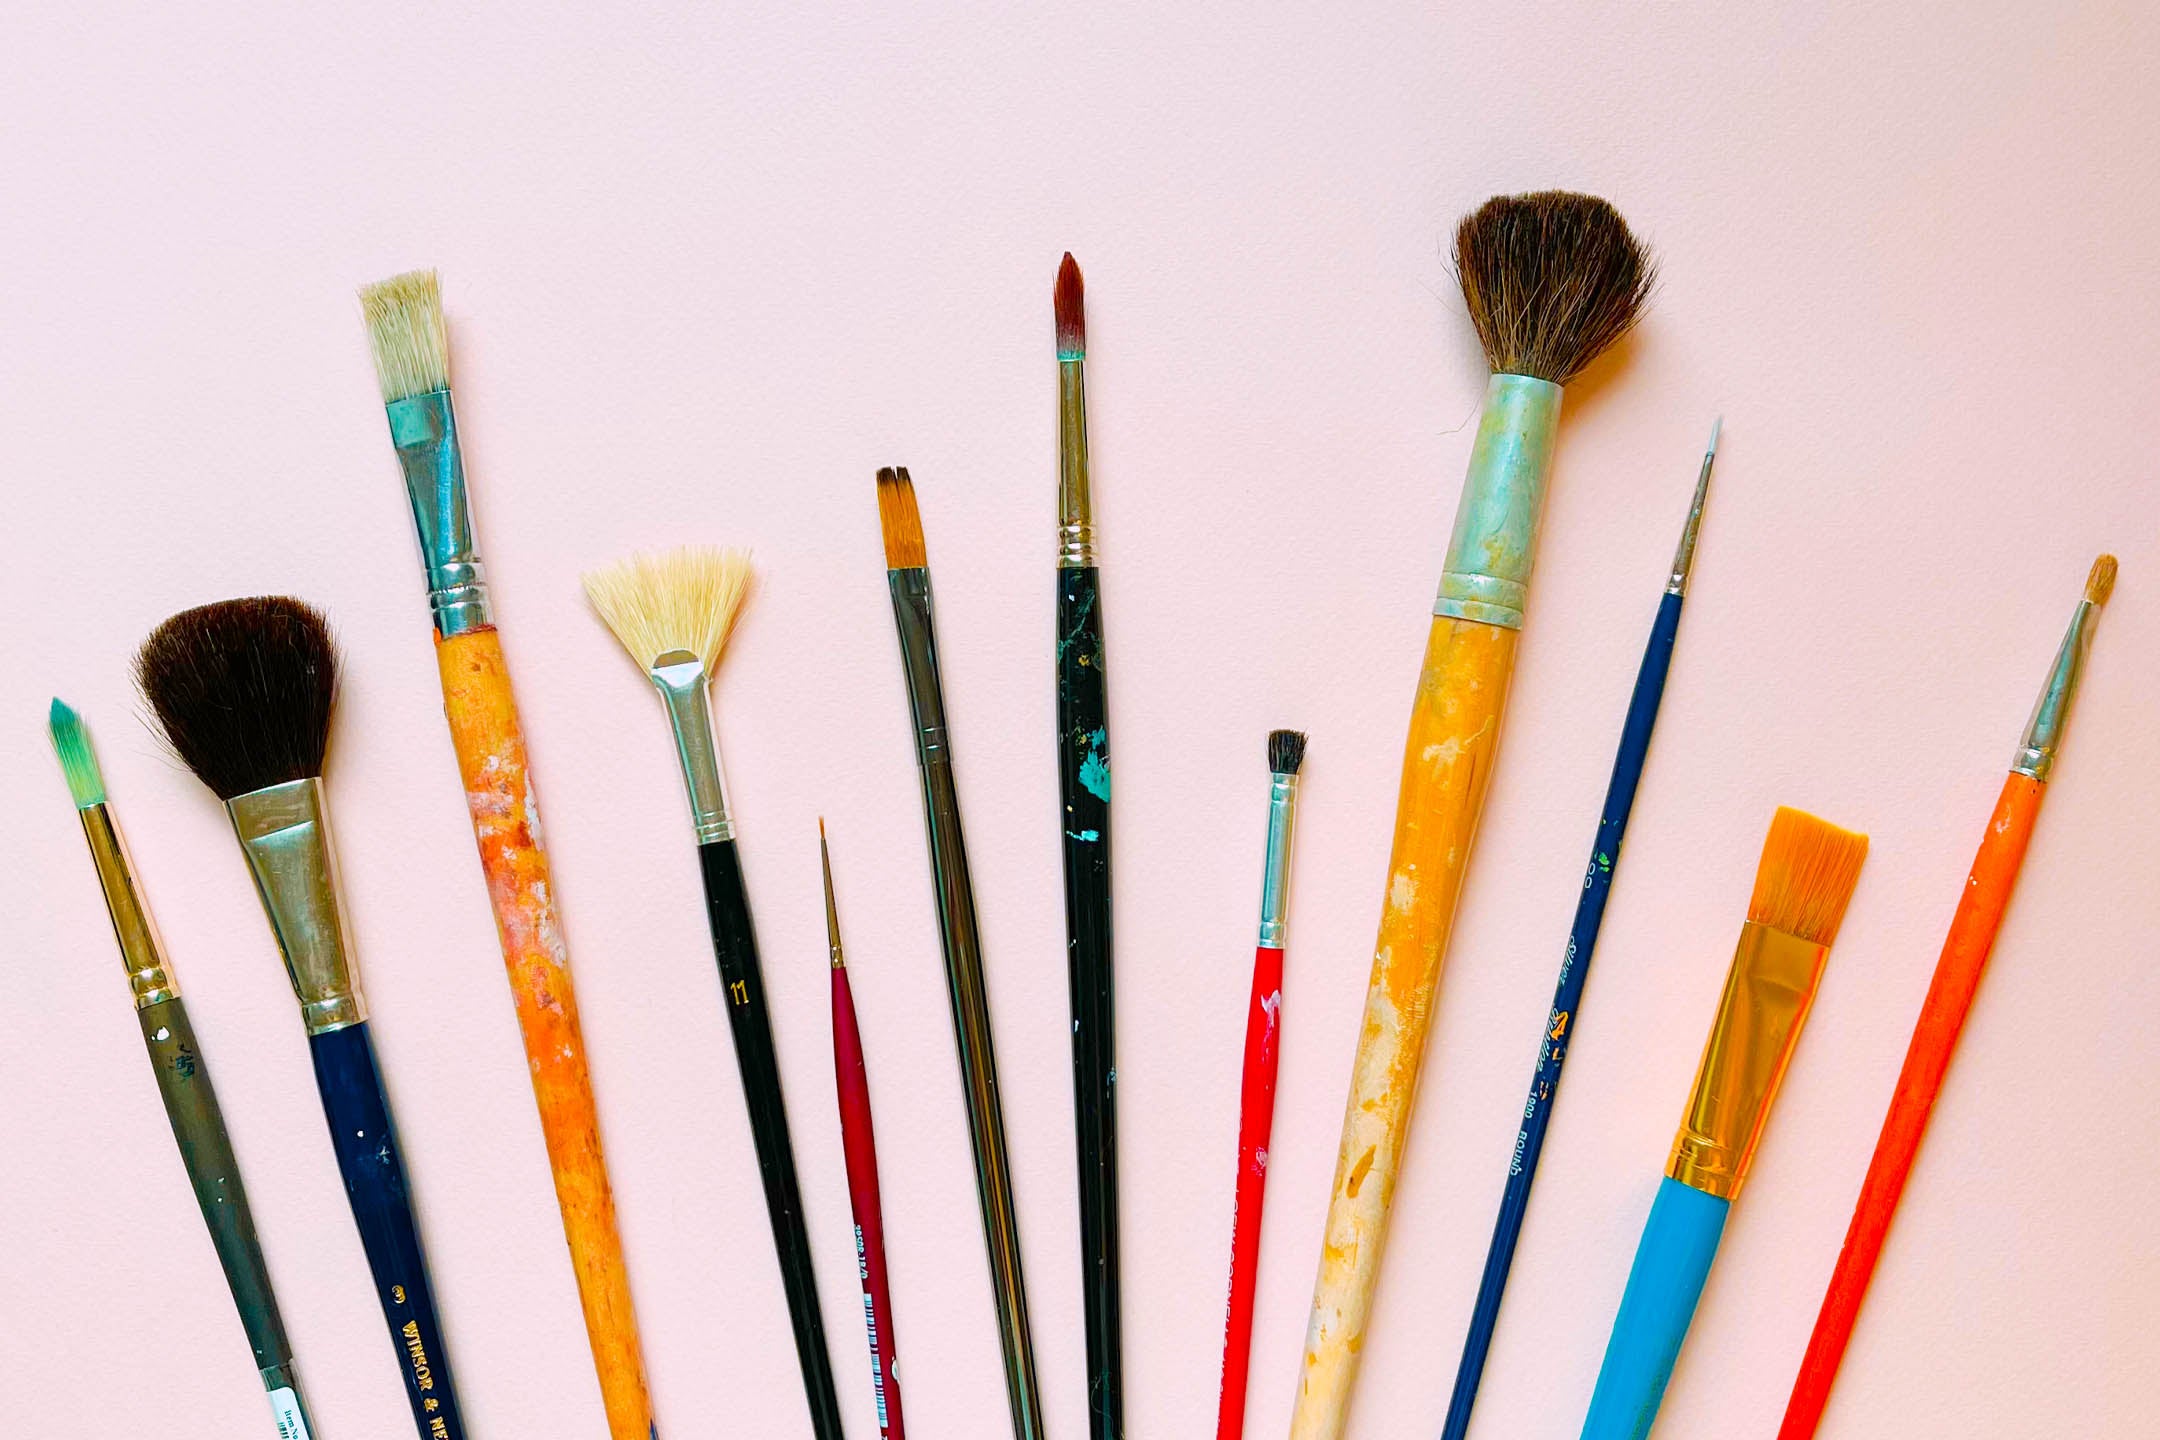 How to clean your paintbrushes - Save them from driedup paint!